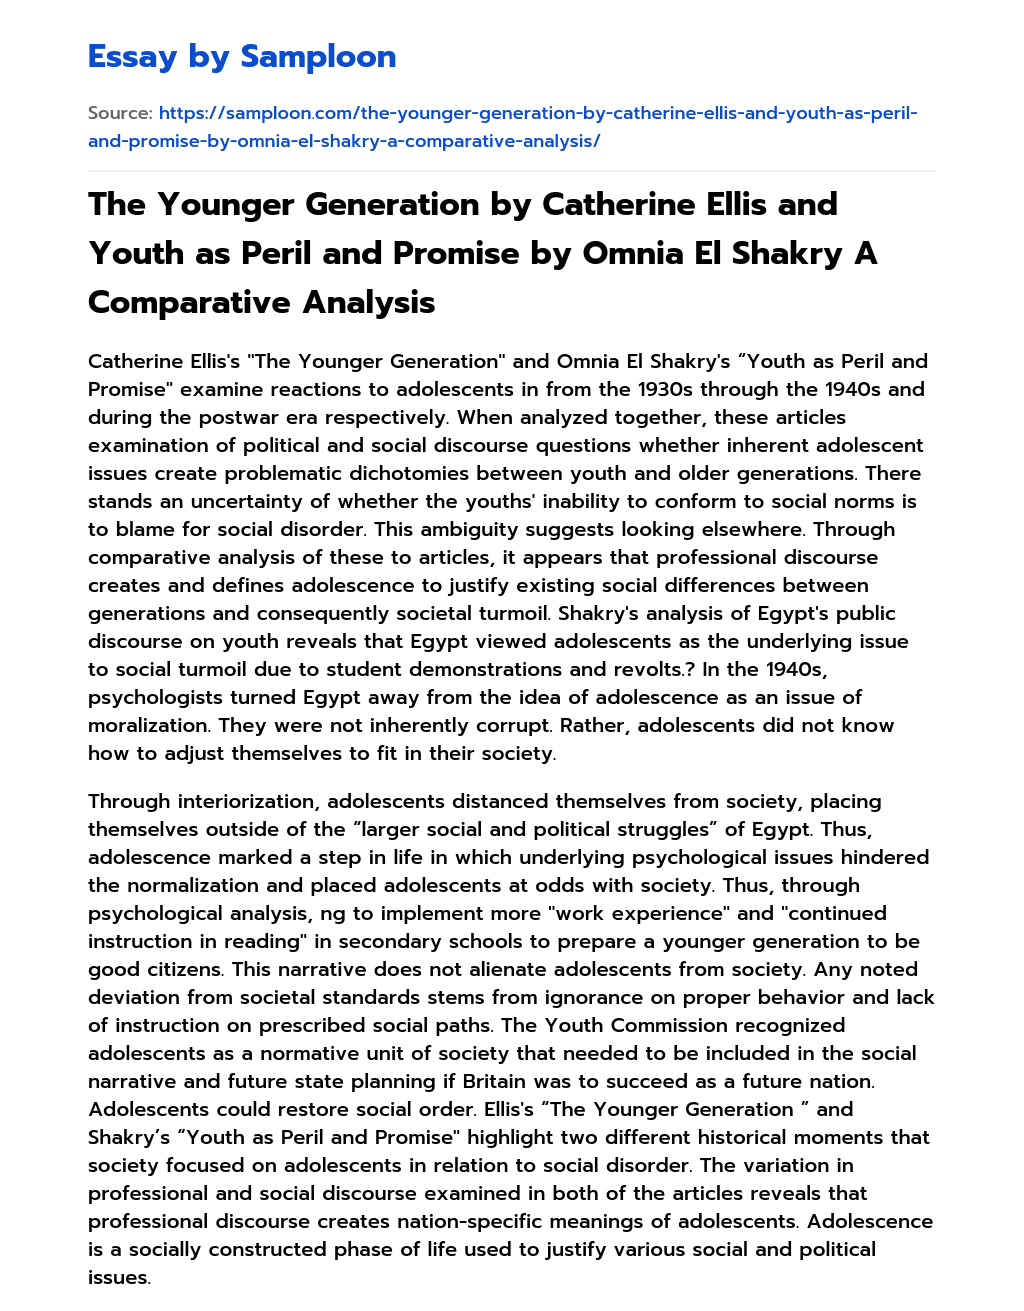 The Younger Generation by Catherine Ellis and Youth as Peril and Promise by Omnia El Shakry A Comparative Analysis essay